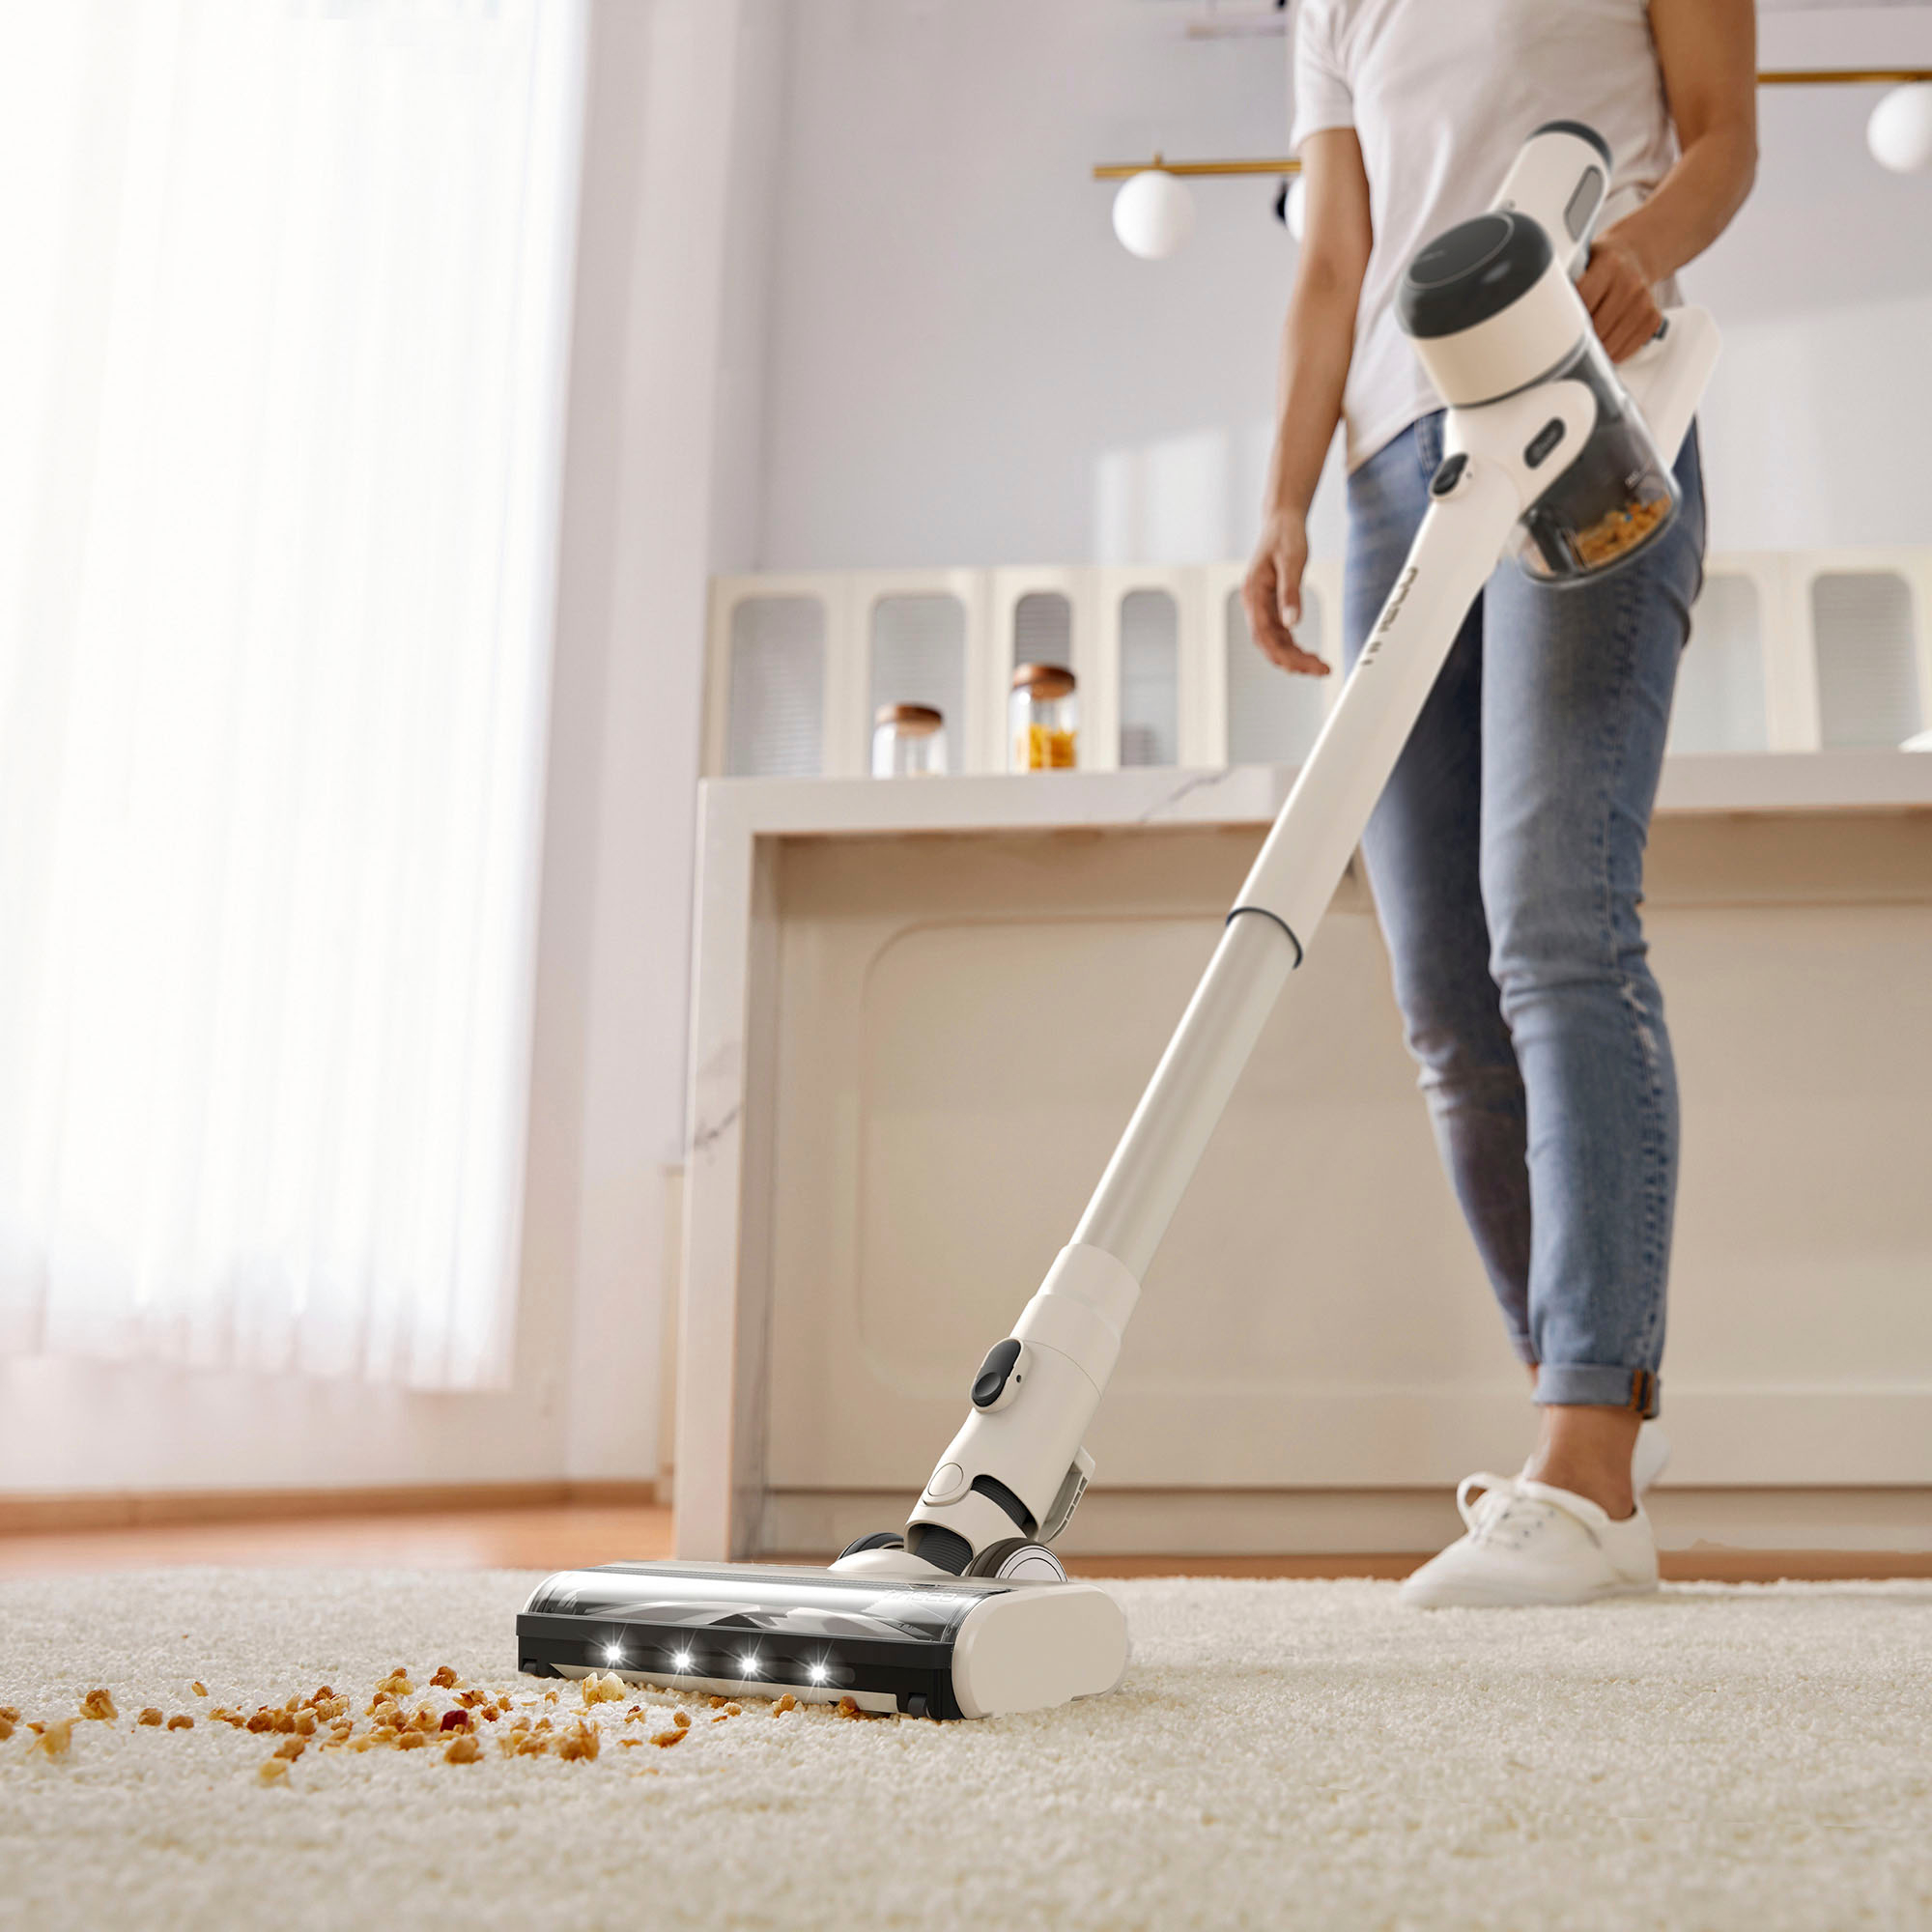 Tineco Pure One x Smart Lightweight Cordless Stick Vacuum Cleaner